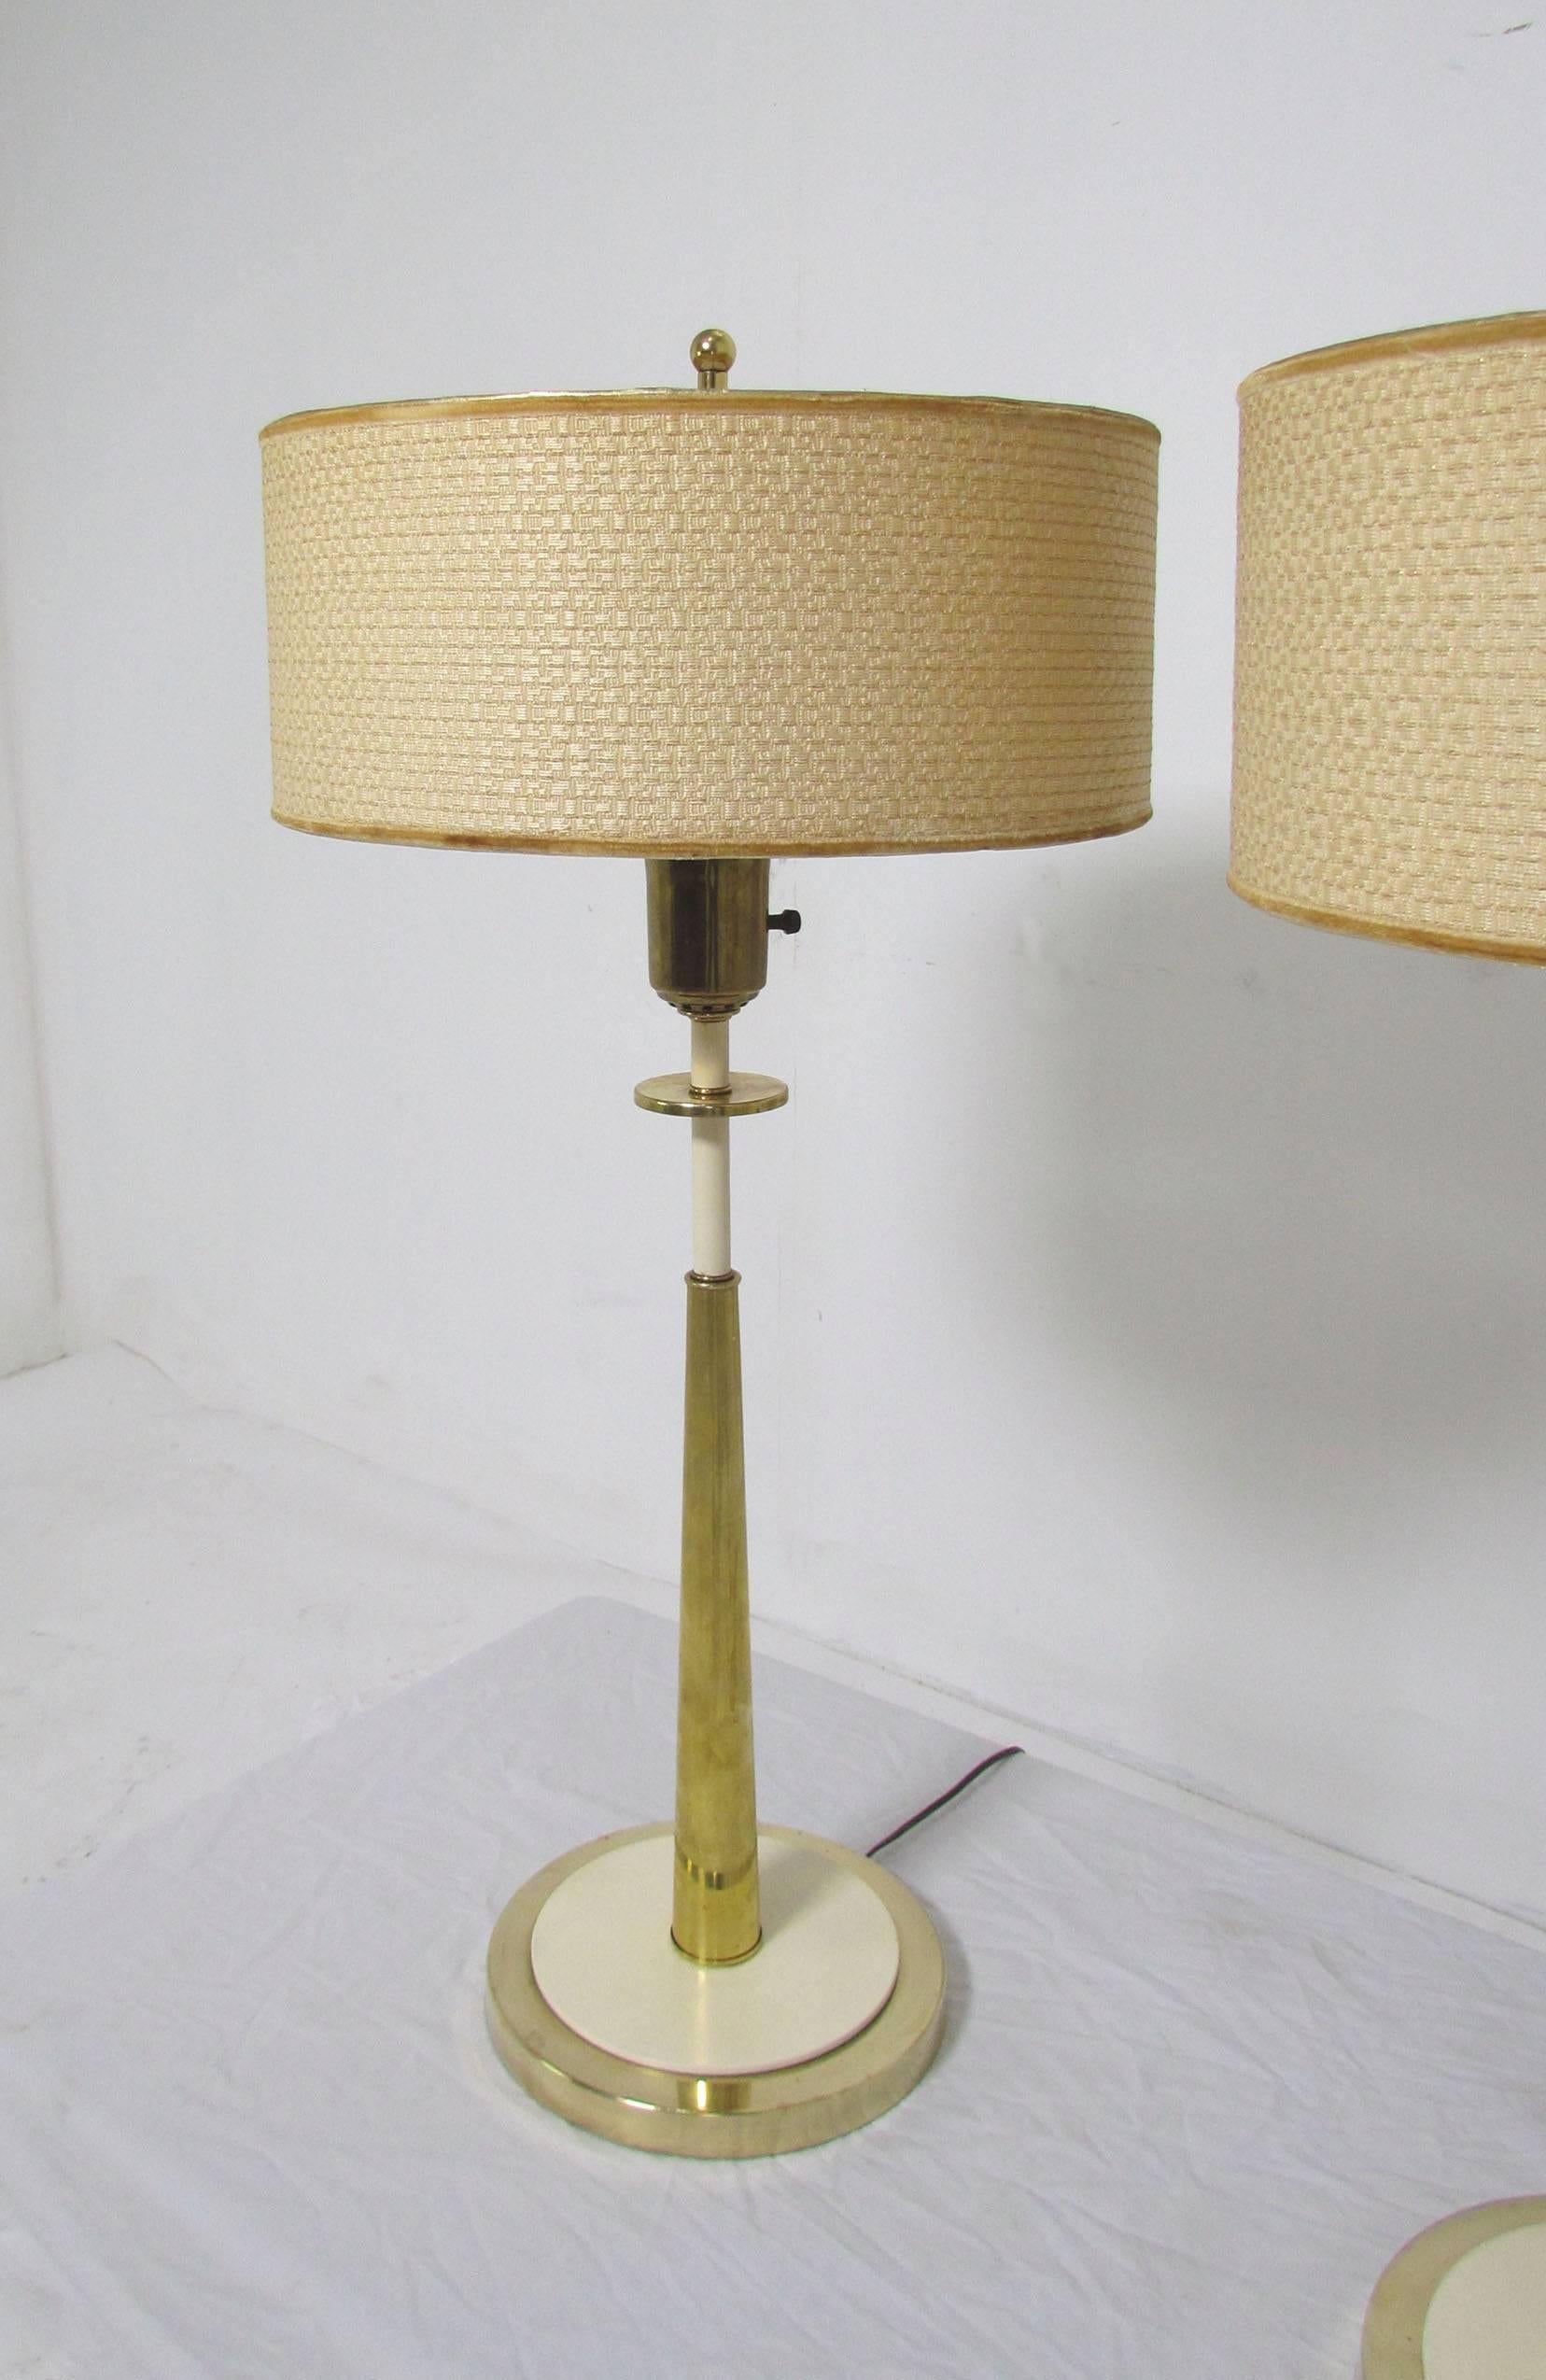 Pair of slender brass table lamps, in the manner of Tommi Parzinger designs for Stiffel. Original shades, finials, and glass diffusers, circa late 1950s-early 1960s.

Measures: 34